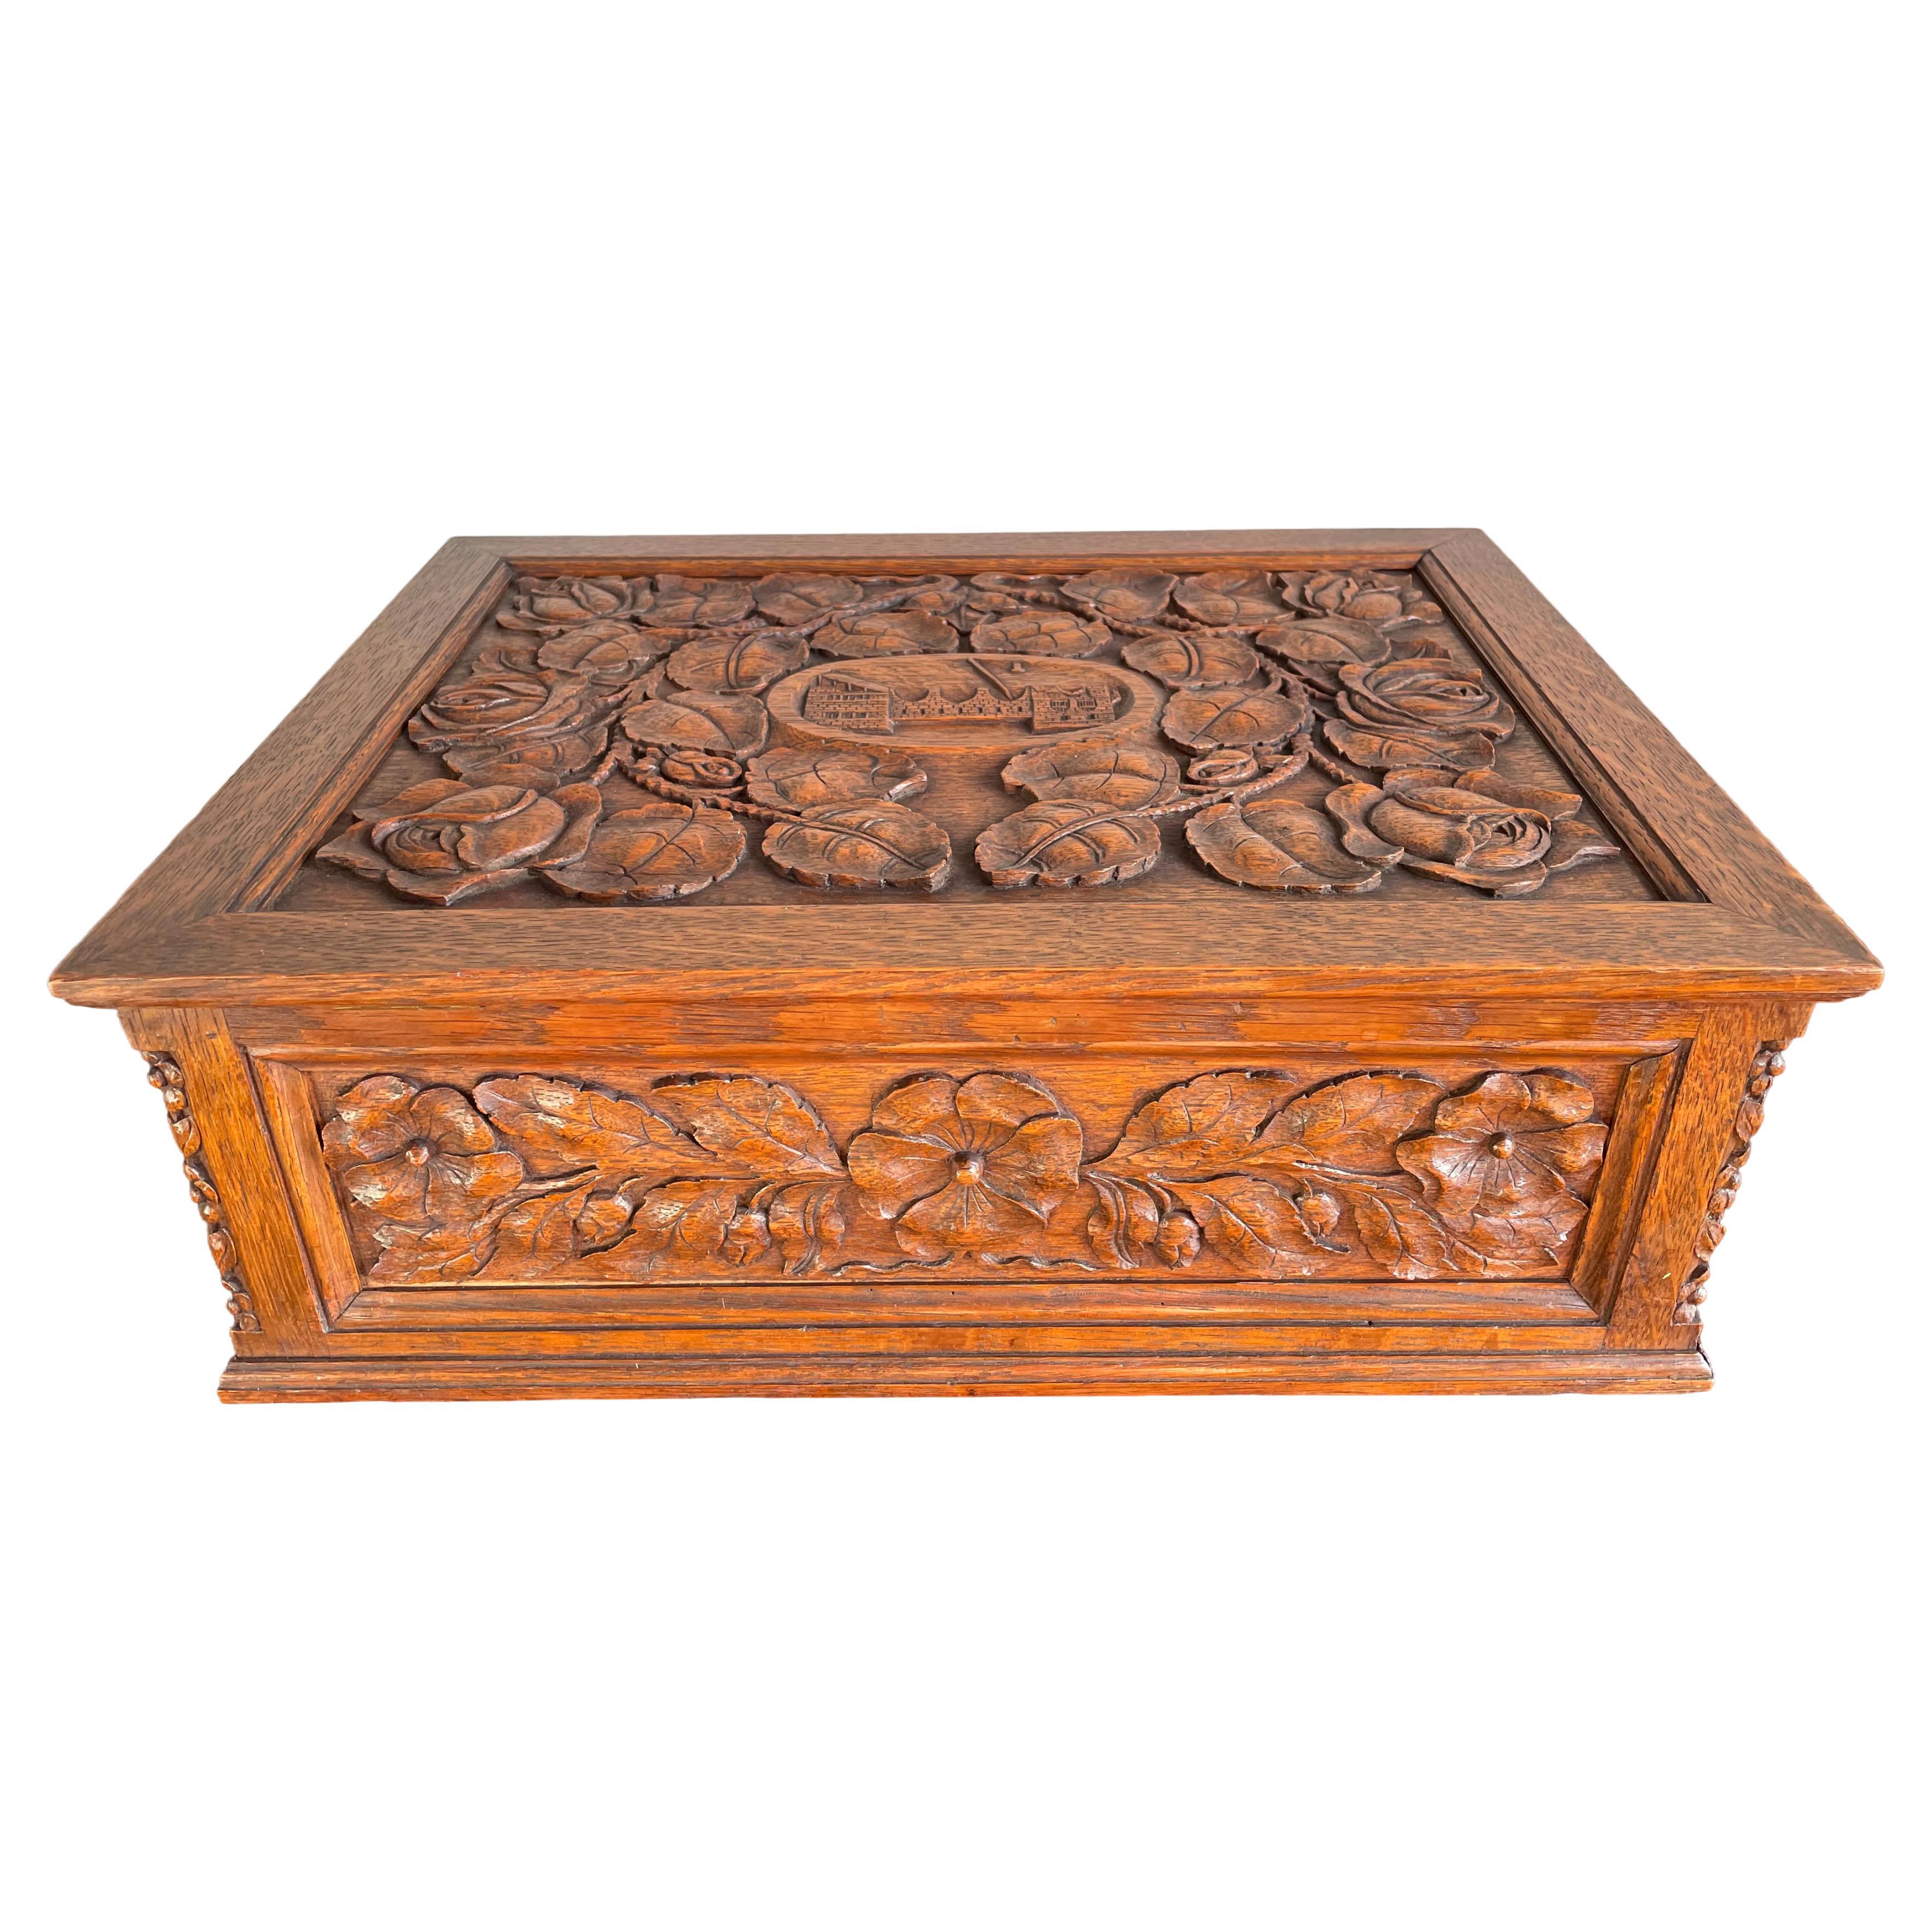 Museum Quality Carved Arts and Crafts Box w. Compartments, Rose Sculptures Etc.